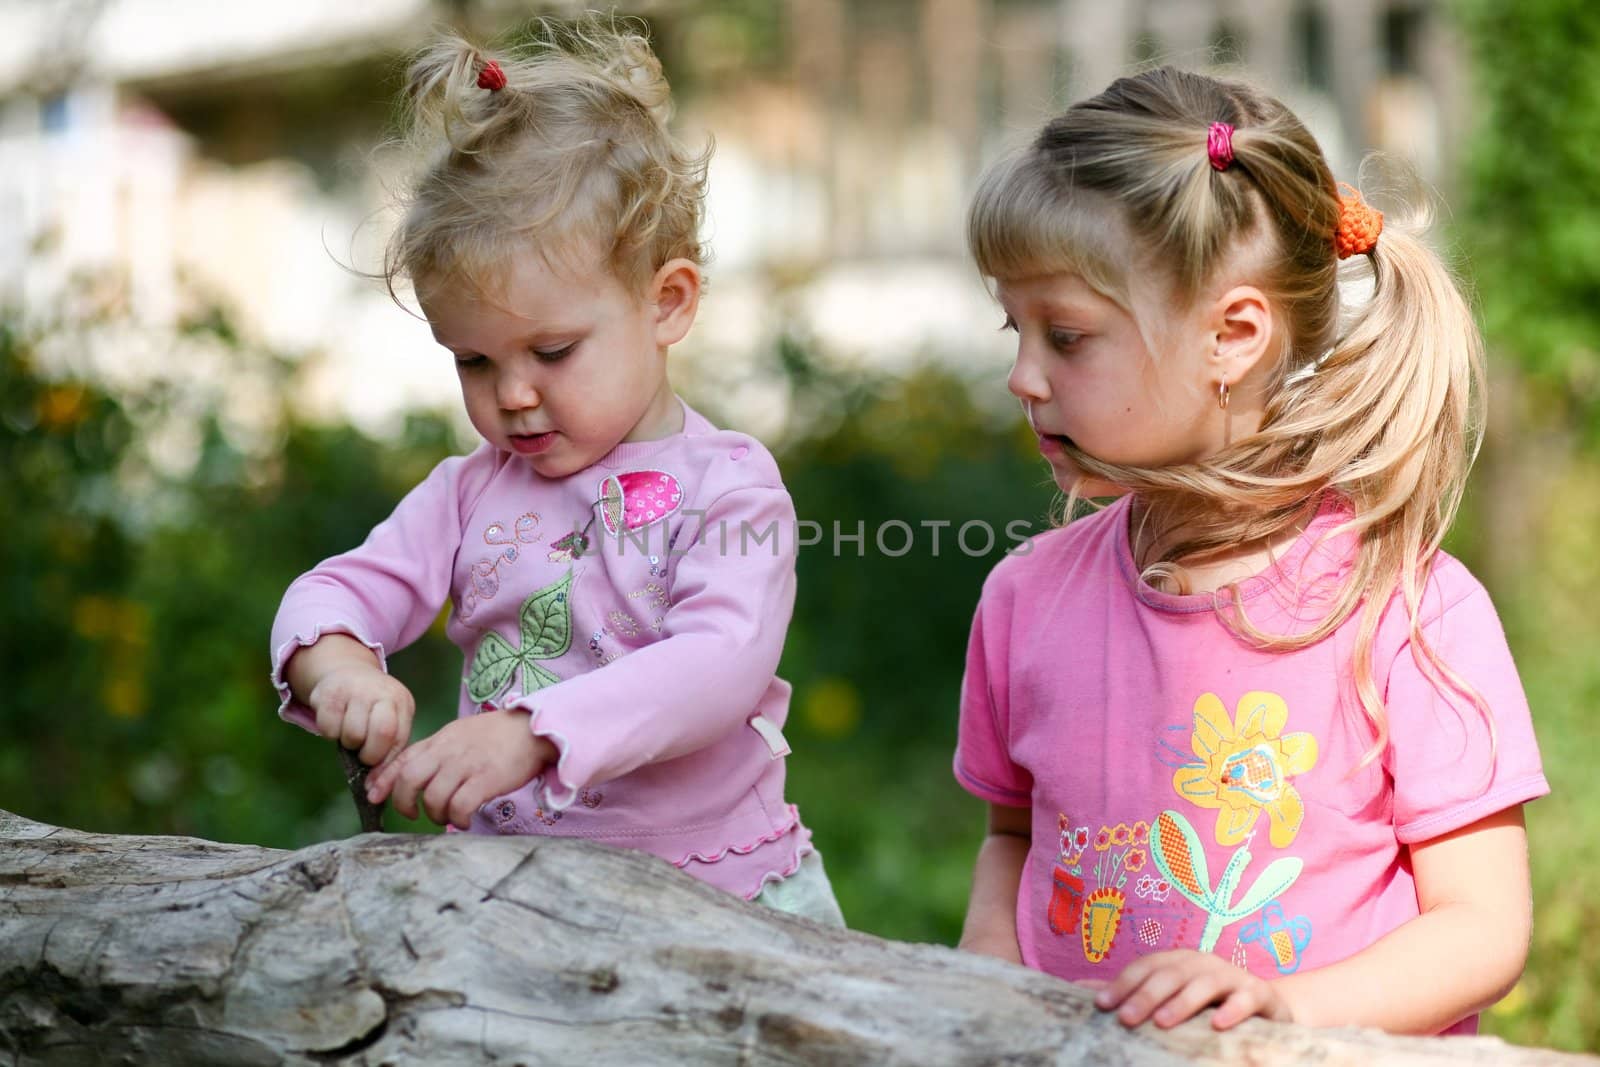 An image of two children playing outdoor